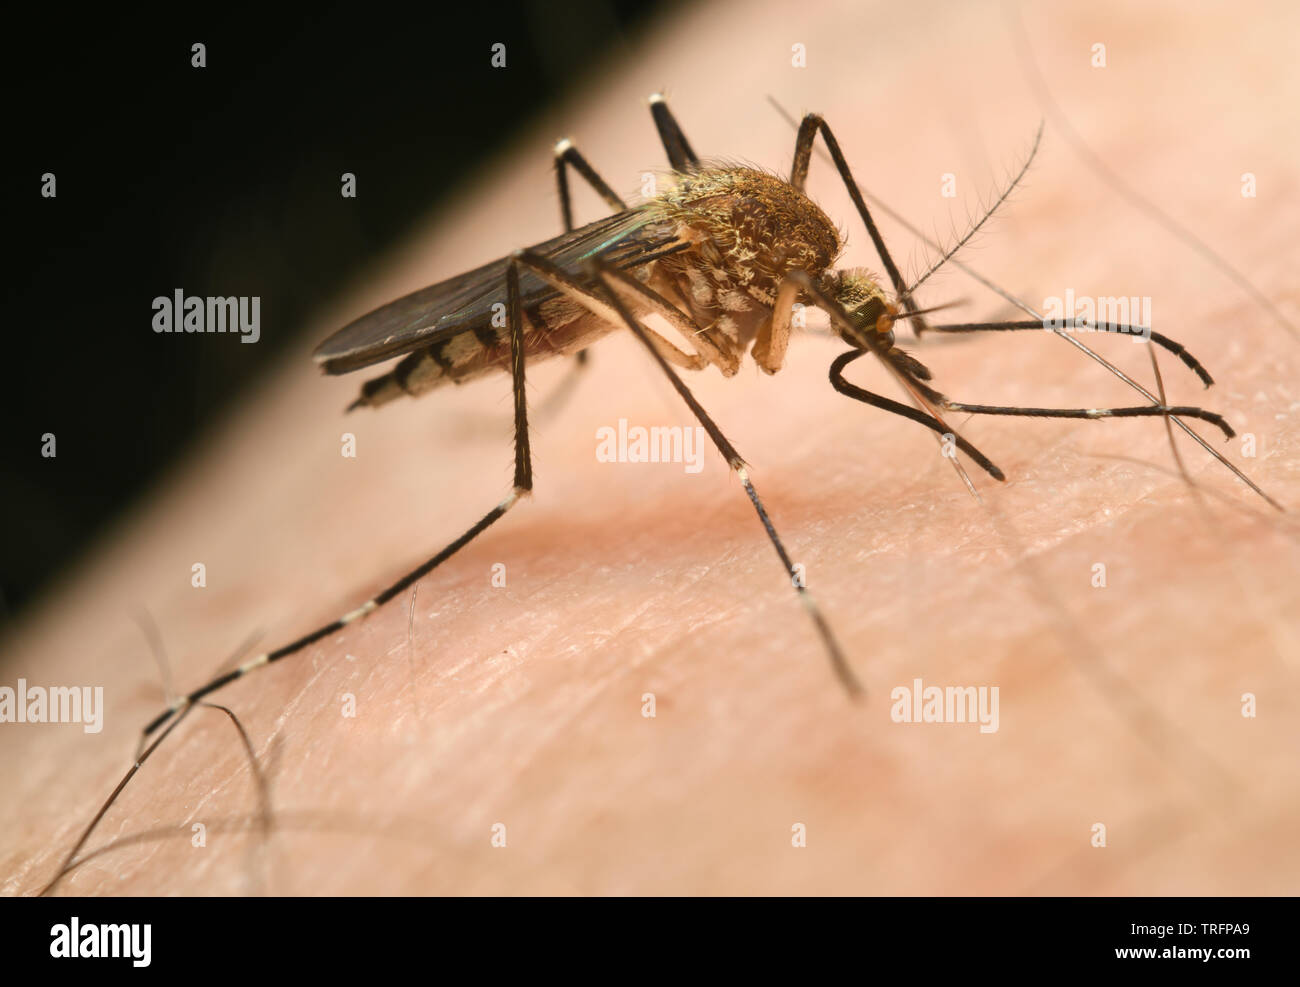 Close up of a female Mosquito Culex pipiens puncturing human skin with needle like proboscis to suck out a blood meal Stock Photo